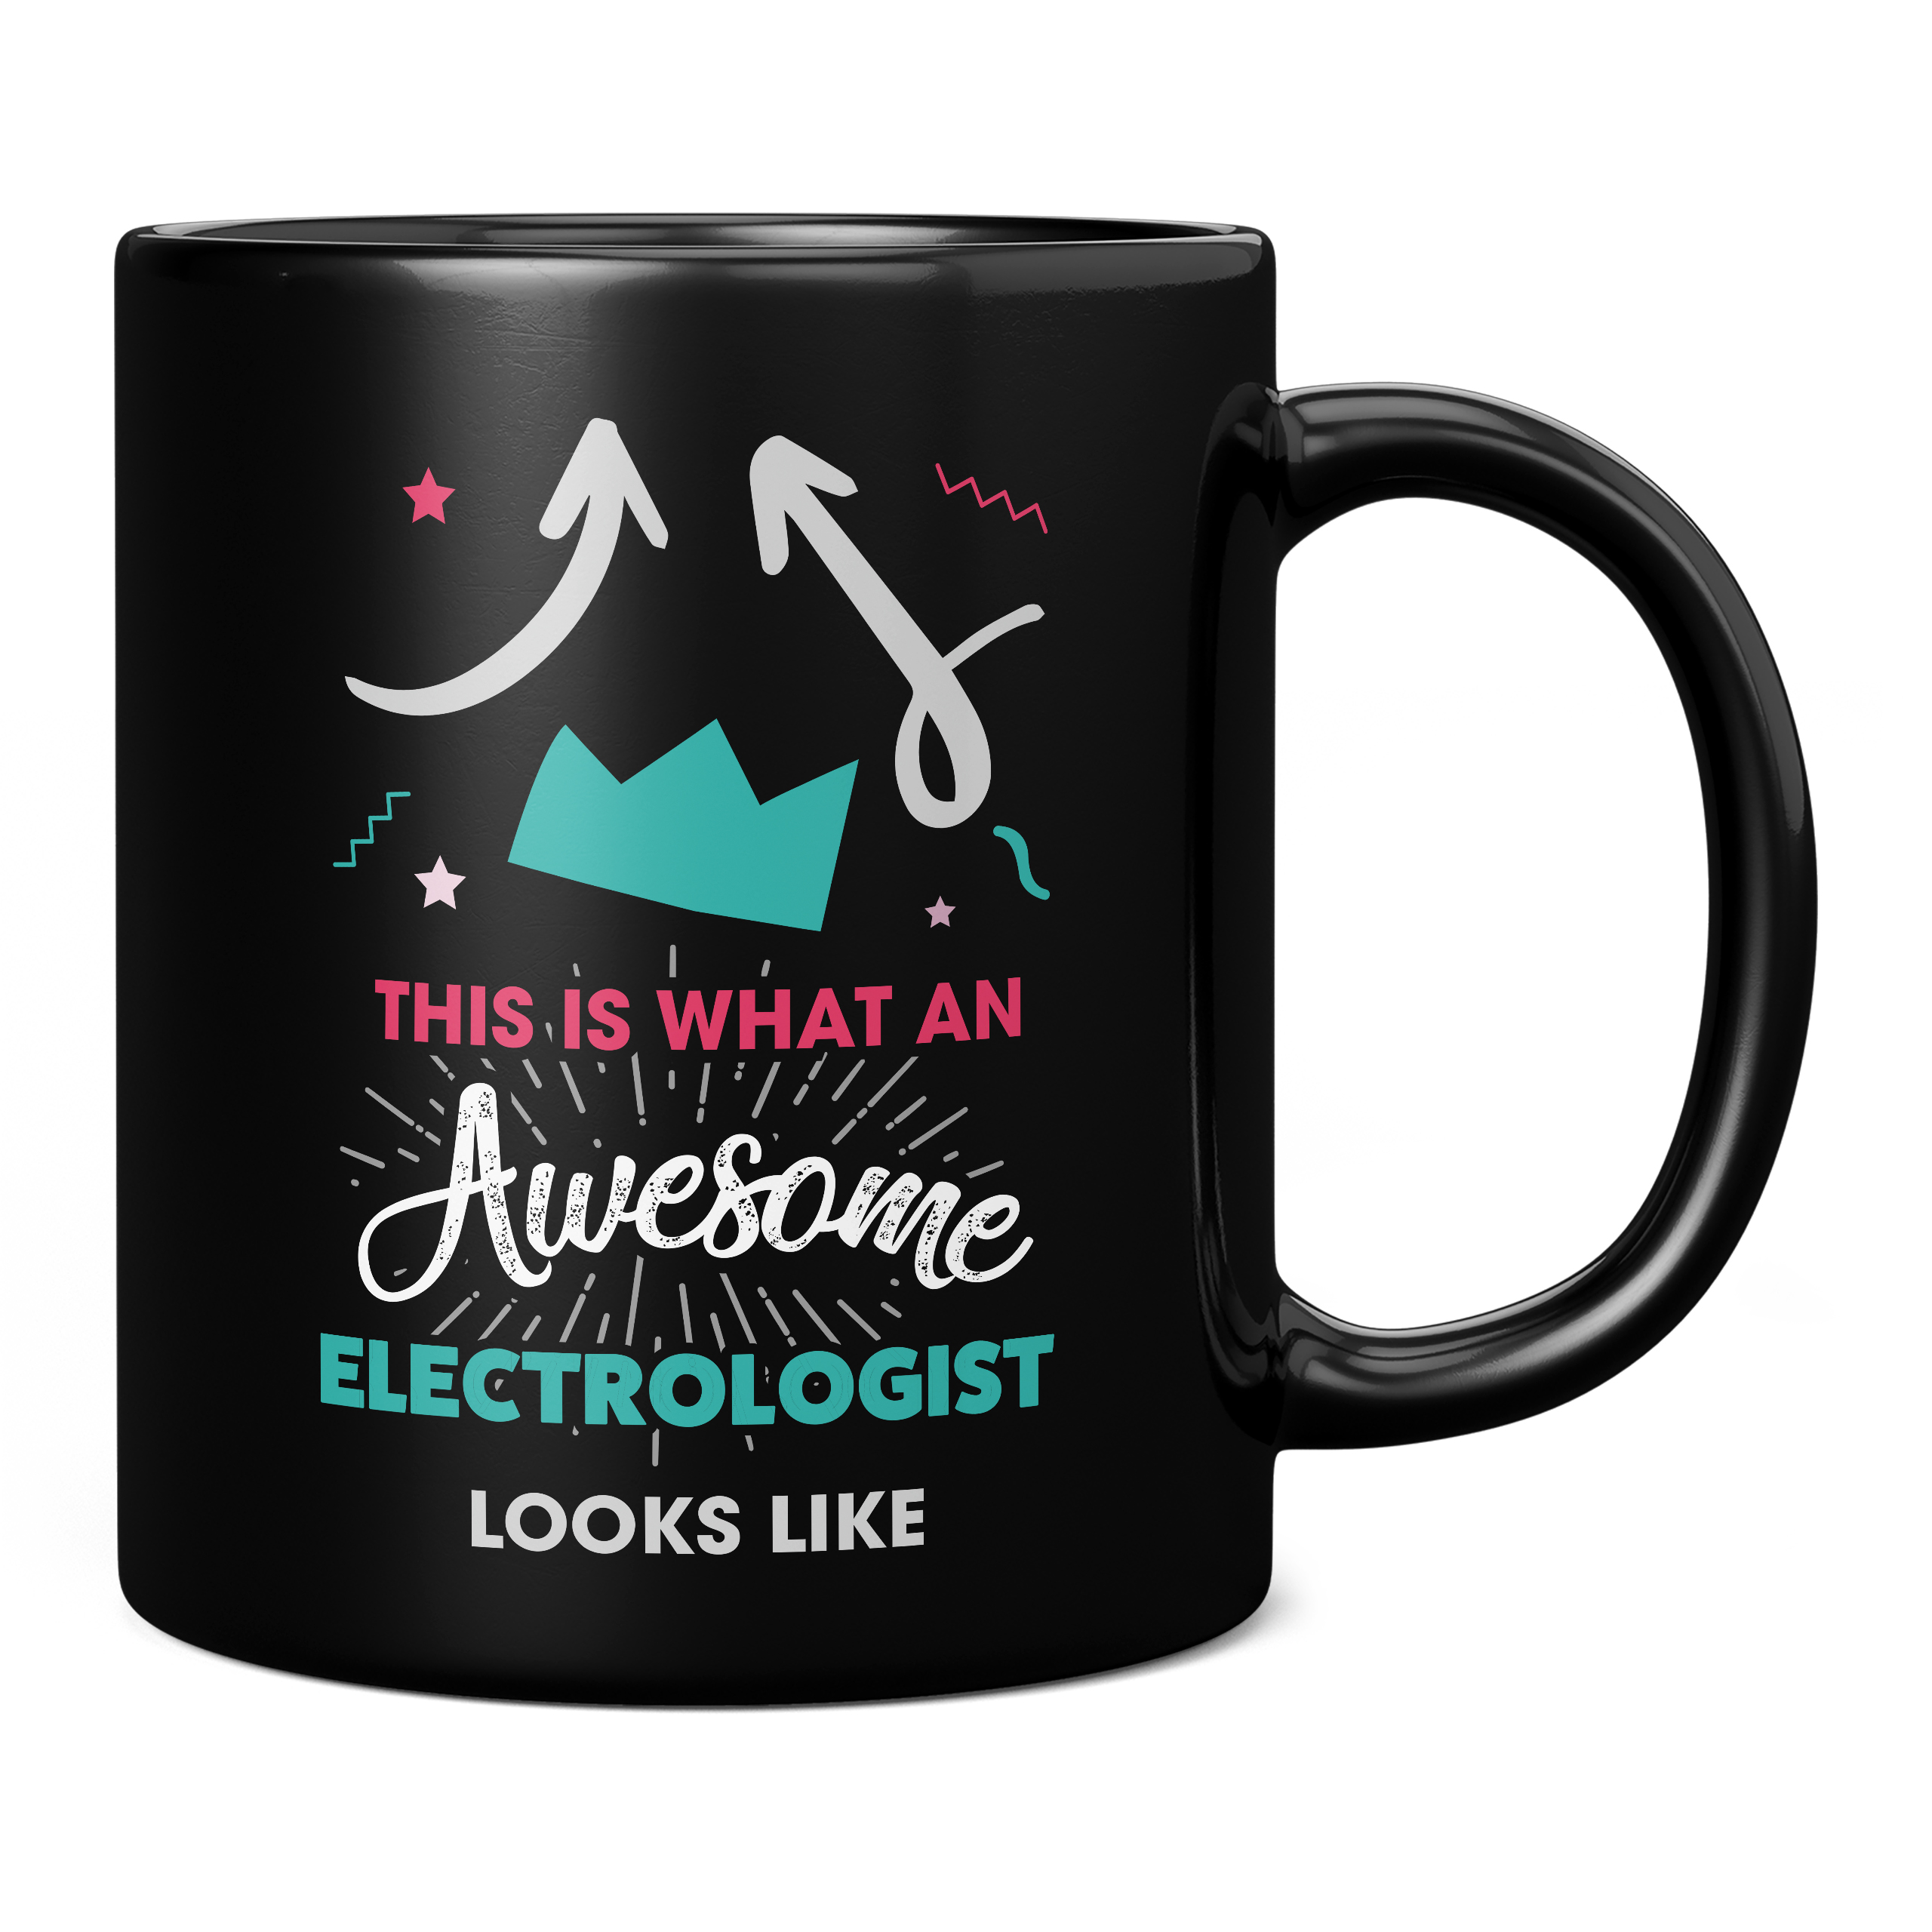 THIS IS WHAT AN AWESOME ELECTROLOGIST LOOKS LIKE 11OZ NOVELTY MUG